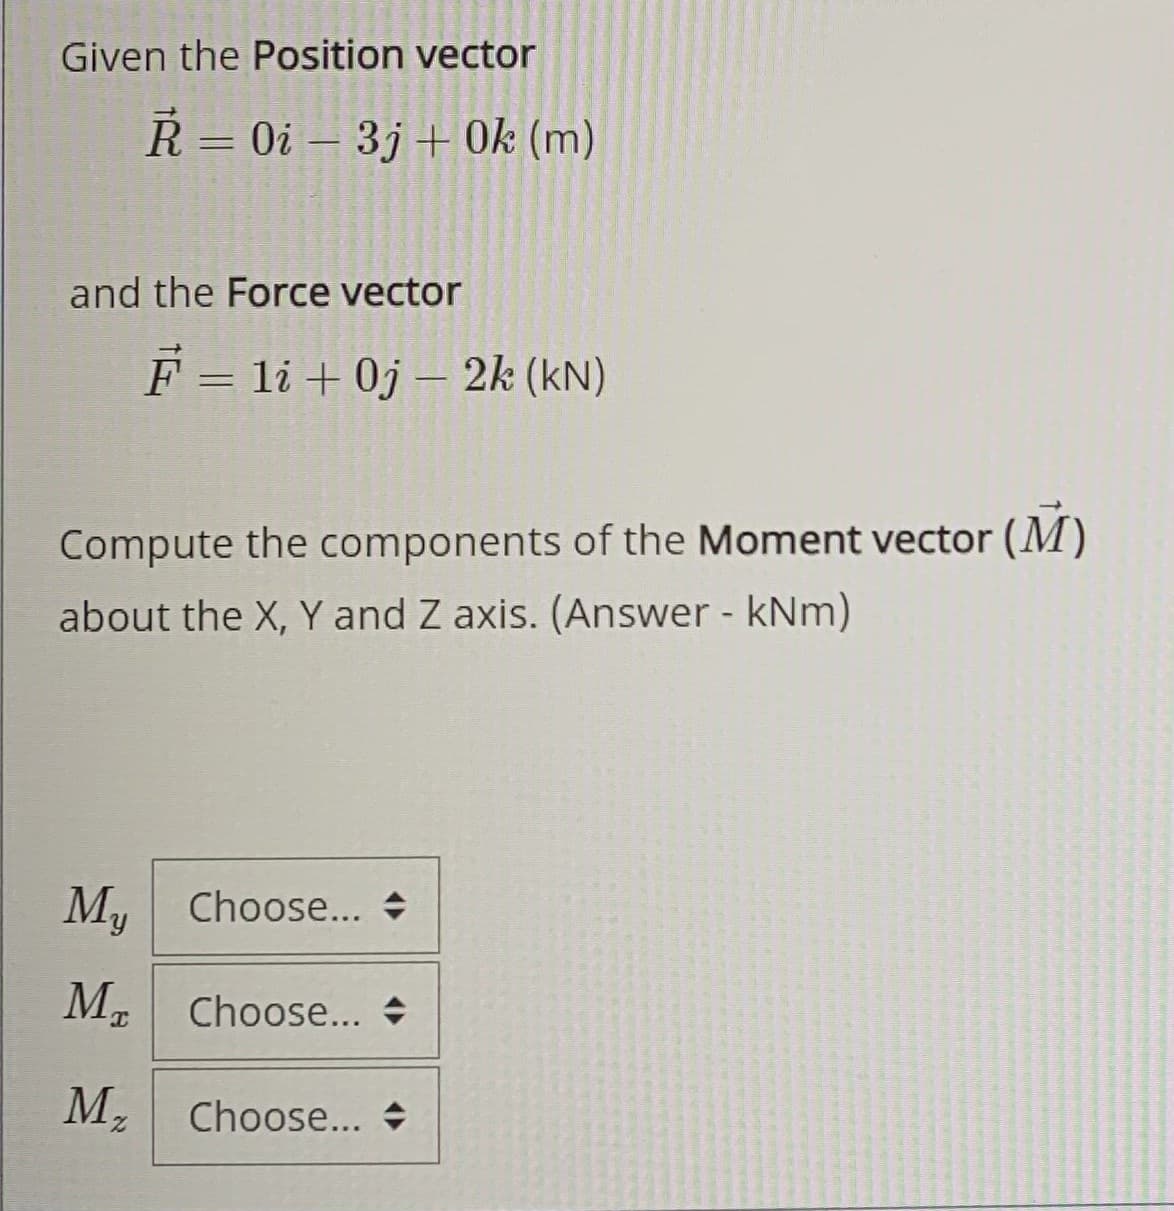 Given the Position vector
R = 0i – 3j+ Ok (m)
%3D
and the Force vector
F = li + 0j – 2k (kN)
|
Compute the components of the Moment vector (M)
about the X, Y and Z axis. (Answer - kNm)
М,
Choose... +
M. Choose... +
M,
Choose... +
